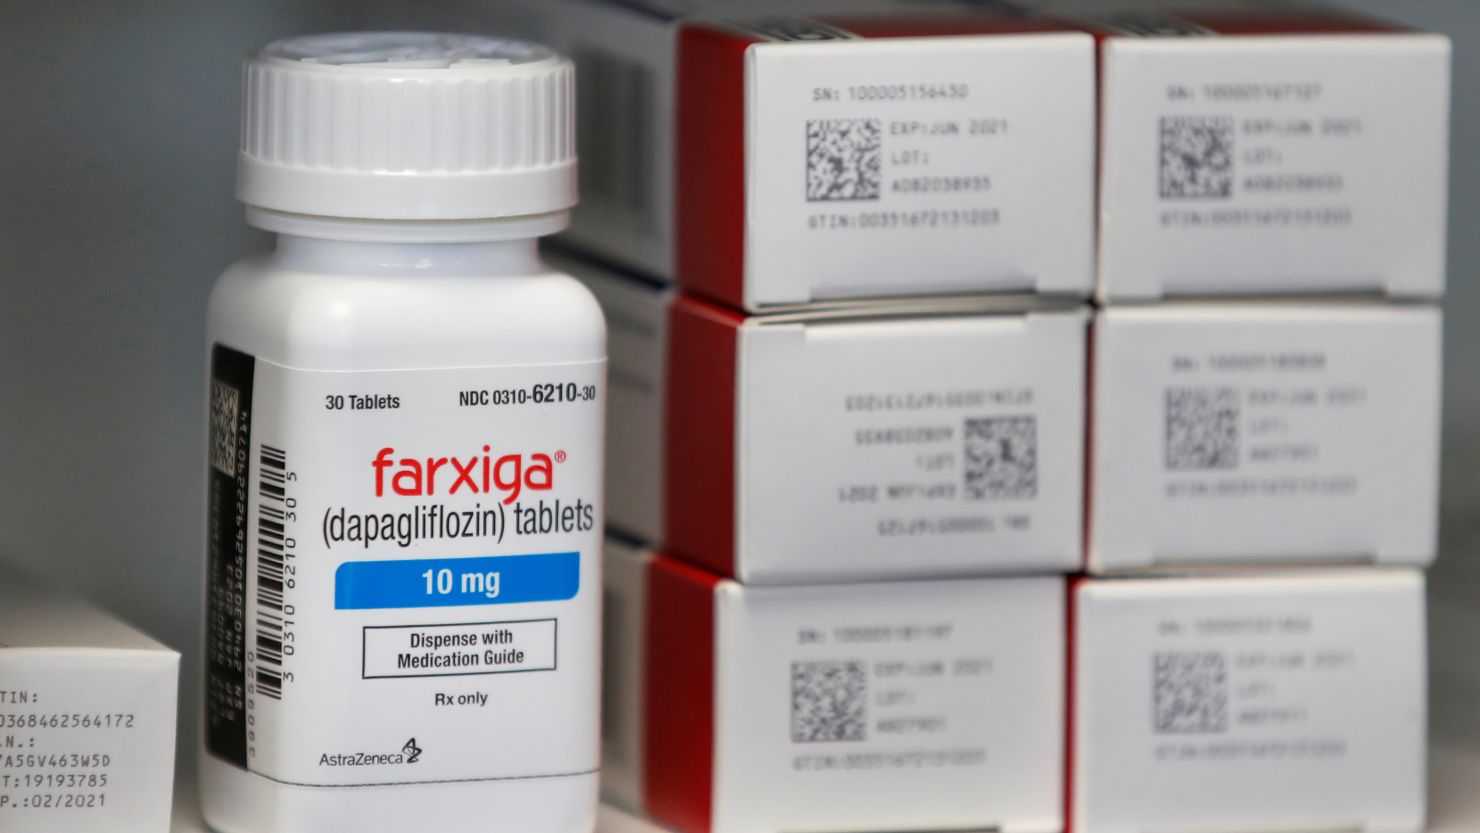 AstraZeneca lost a legal challenge over Medicare's ability to negotiate the price of its Farxiga drug.